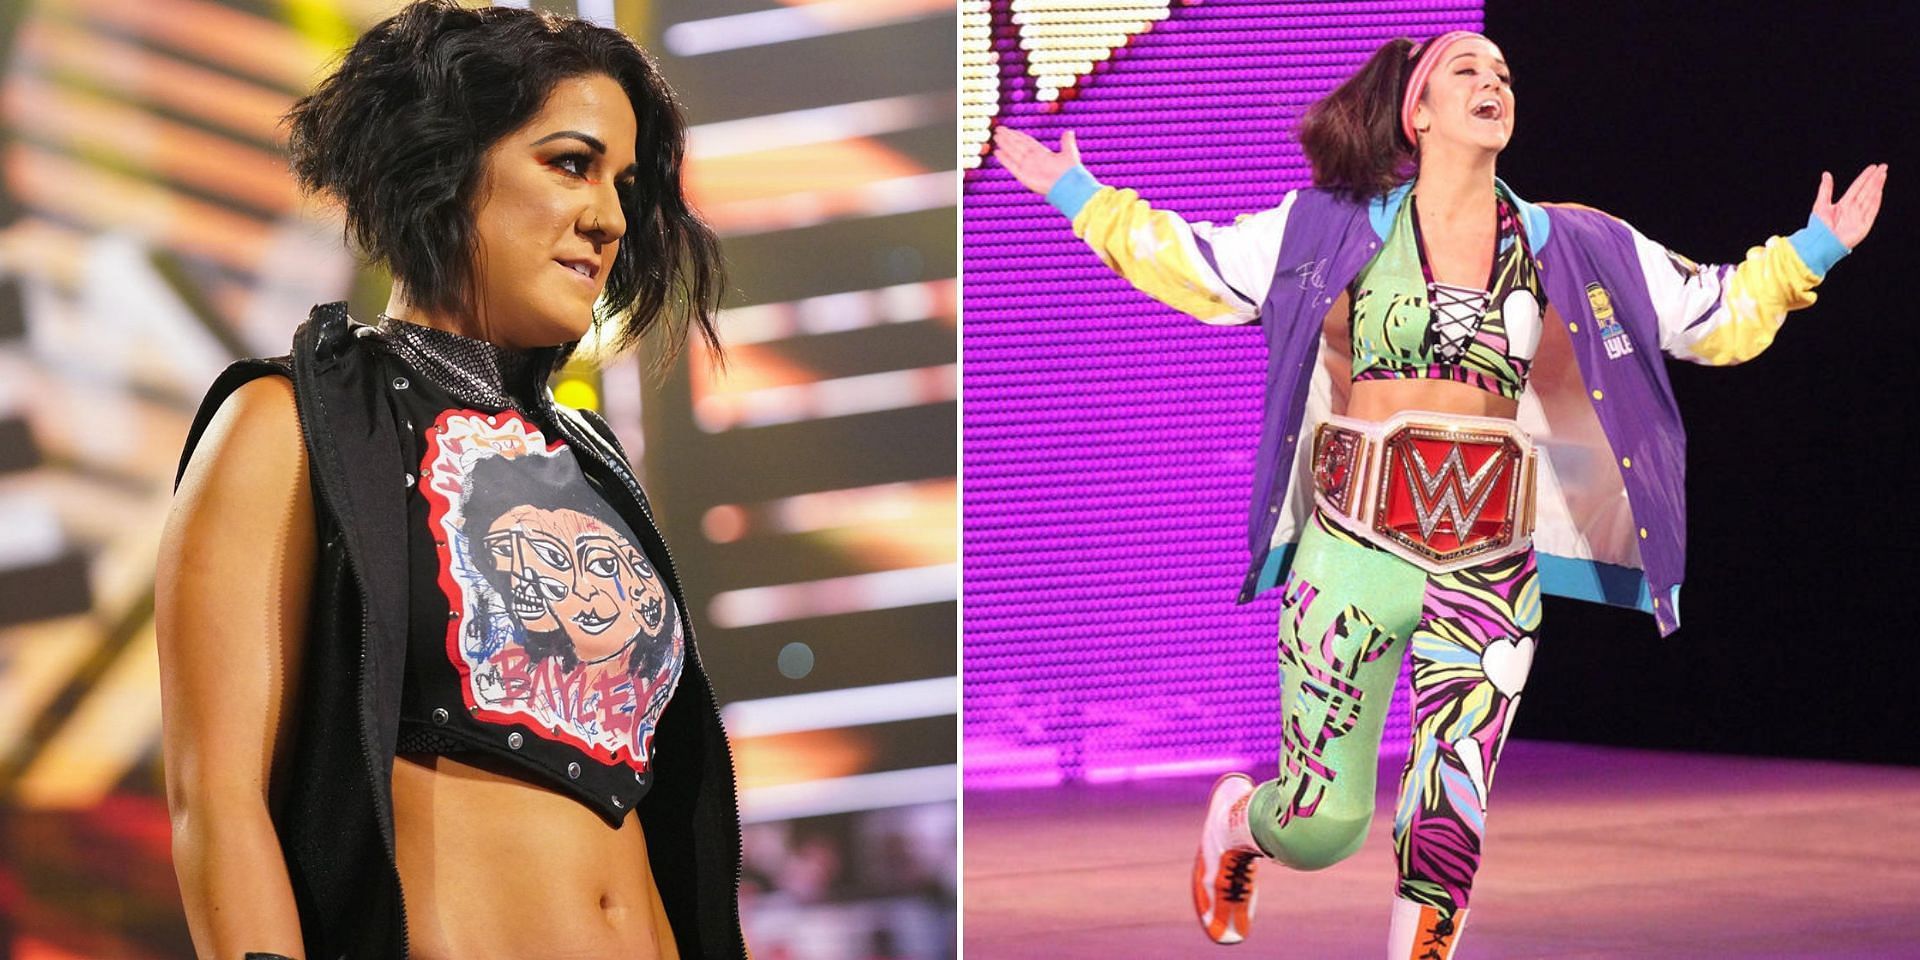 Bayley has reflected on her 